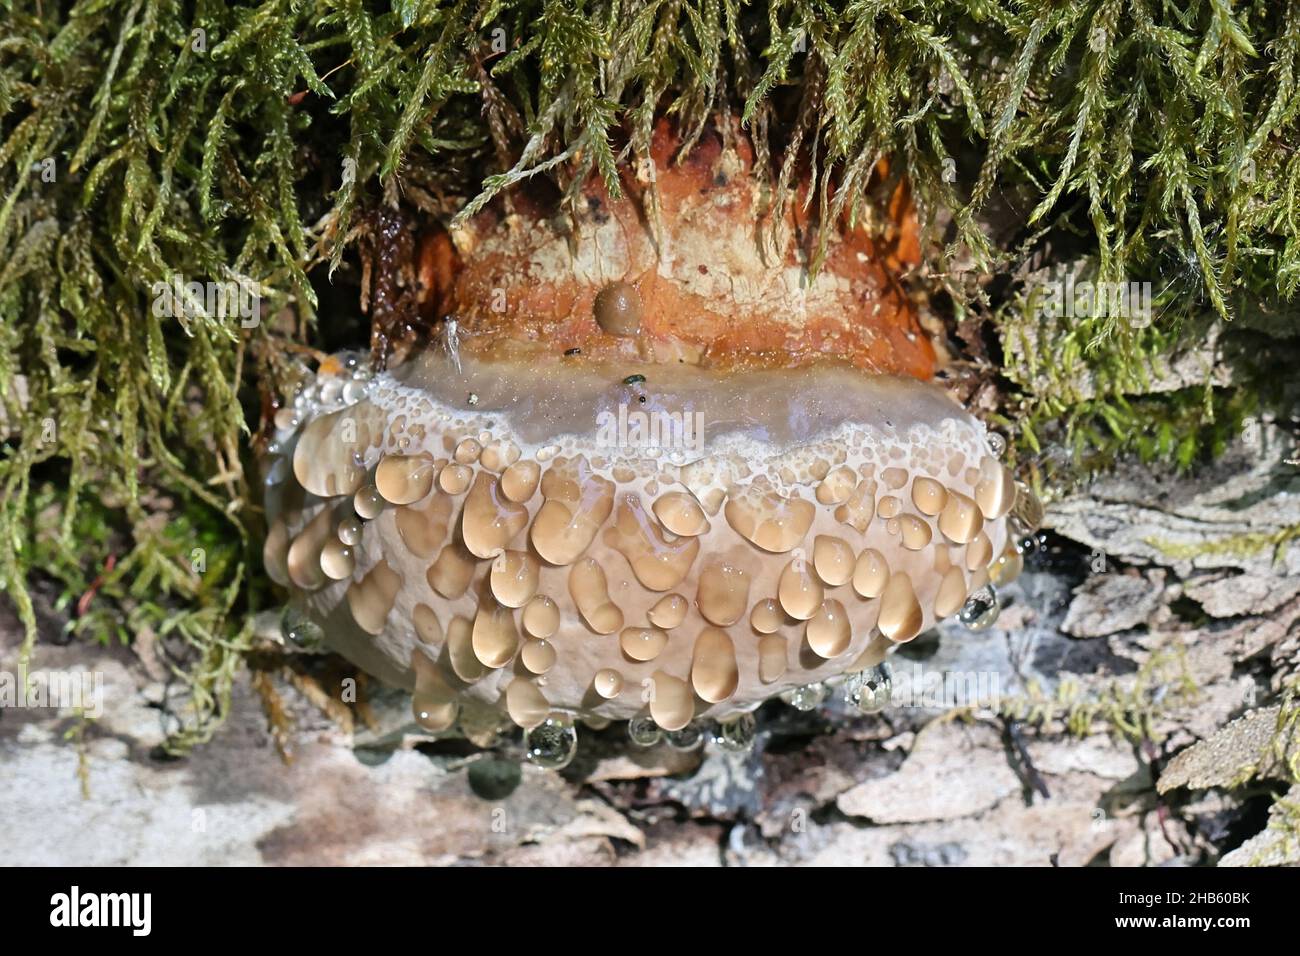 Guttation is the exudation of drops of xylem sap on the surface of fungi, here on red-belted conk,  Fomitopsis pinicola Stock Photo